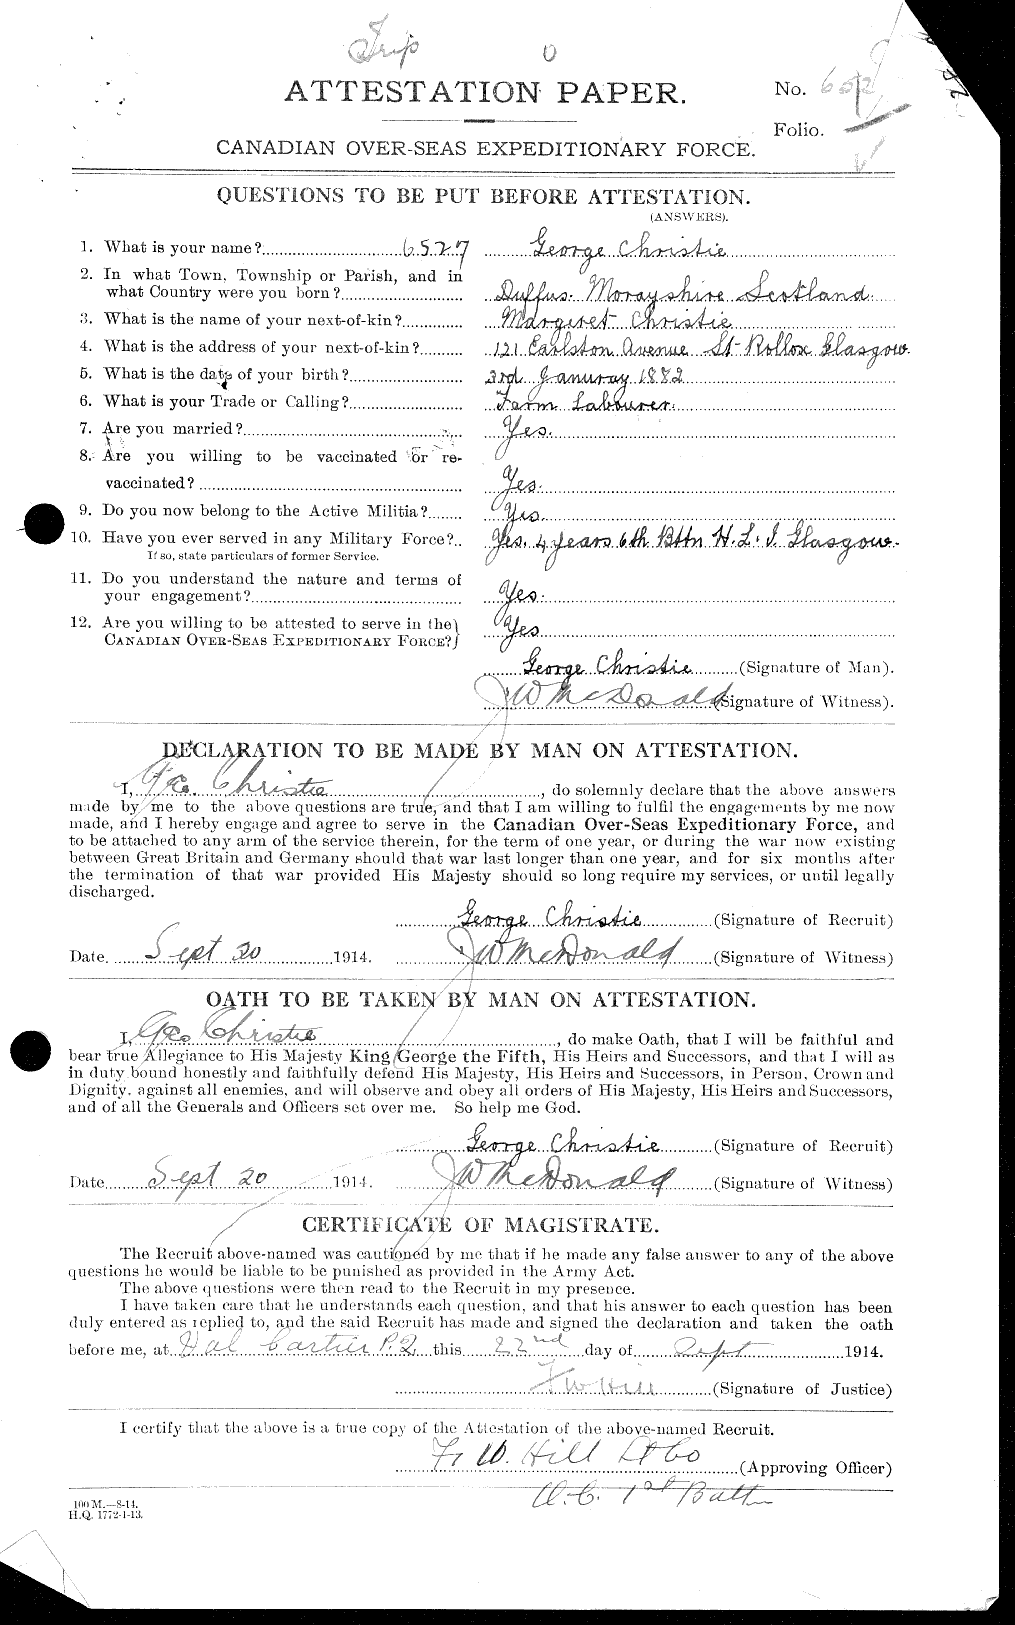 Personnel Records of the First World War - CEF 021932a